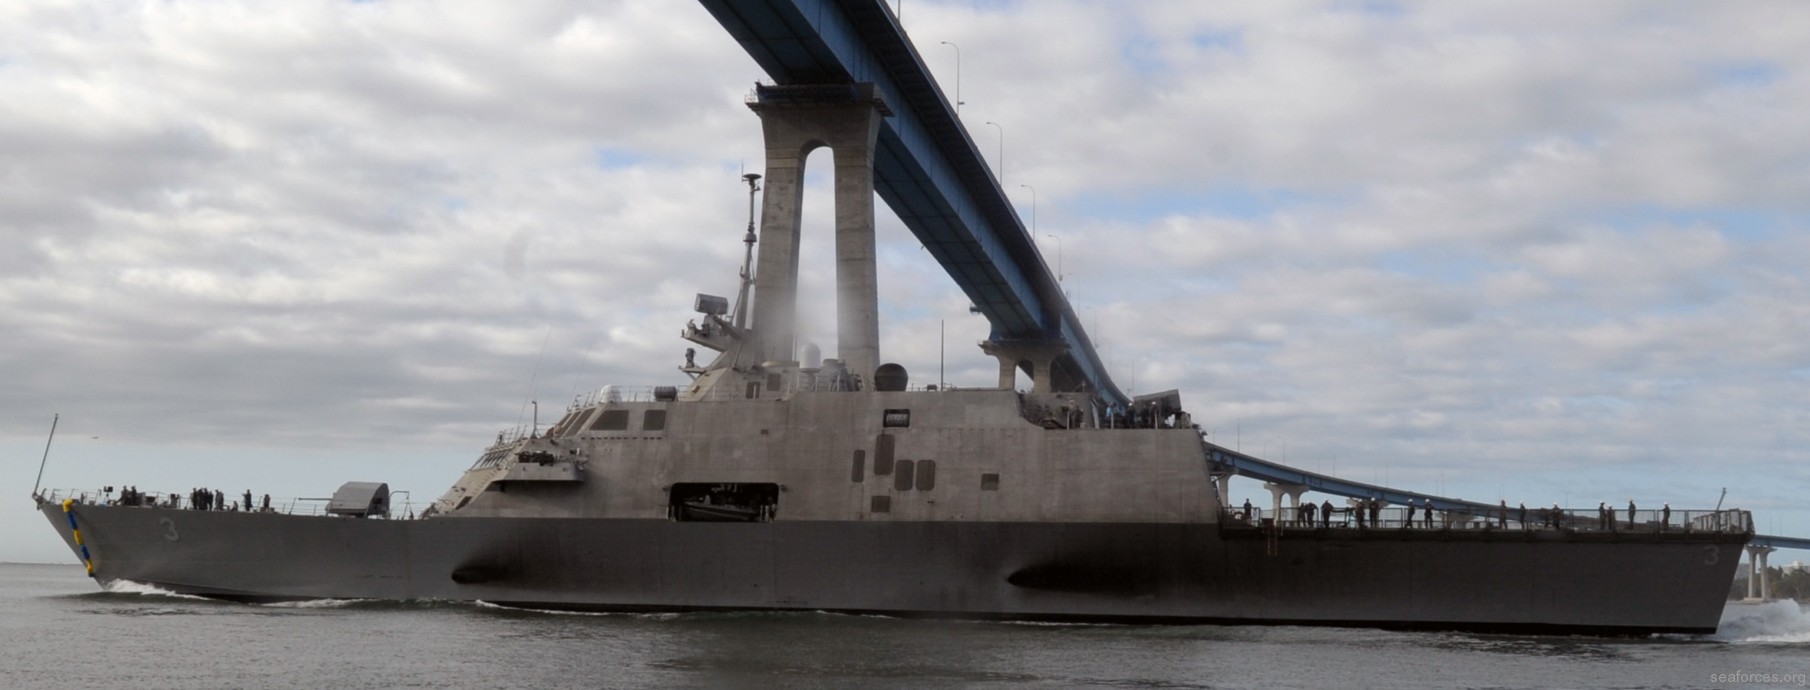 lcs-3 uss fort worth littoral combat ship freedom class us navy 51